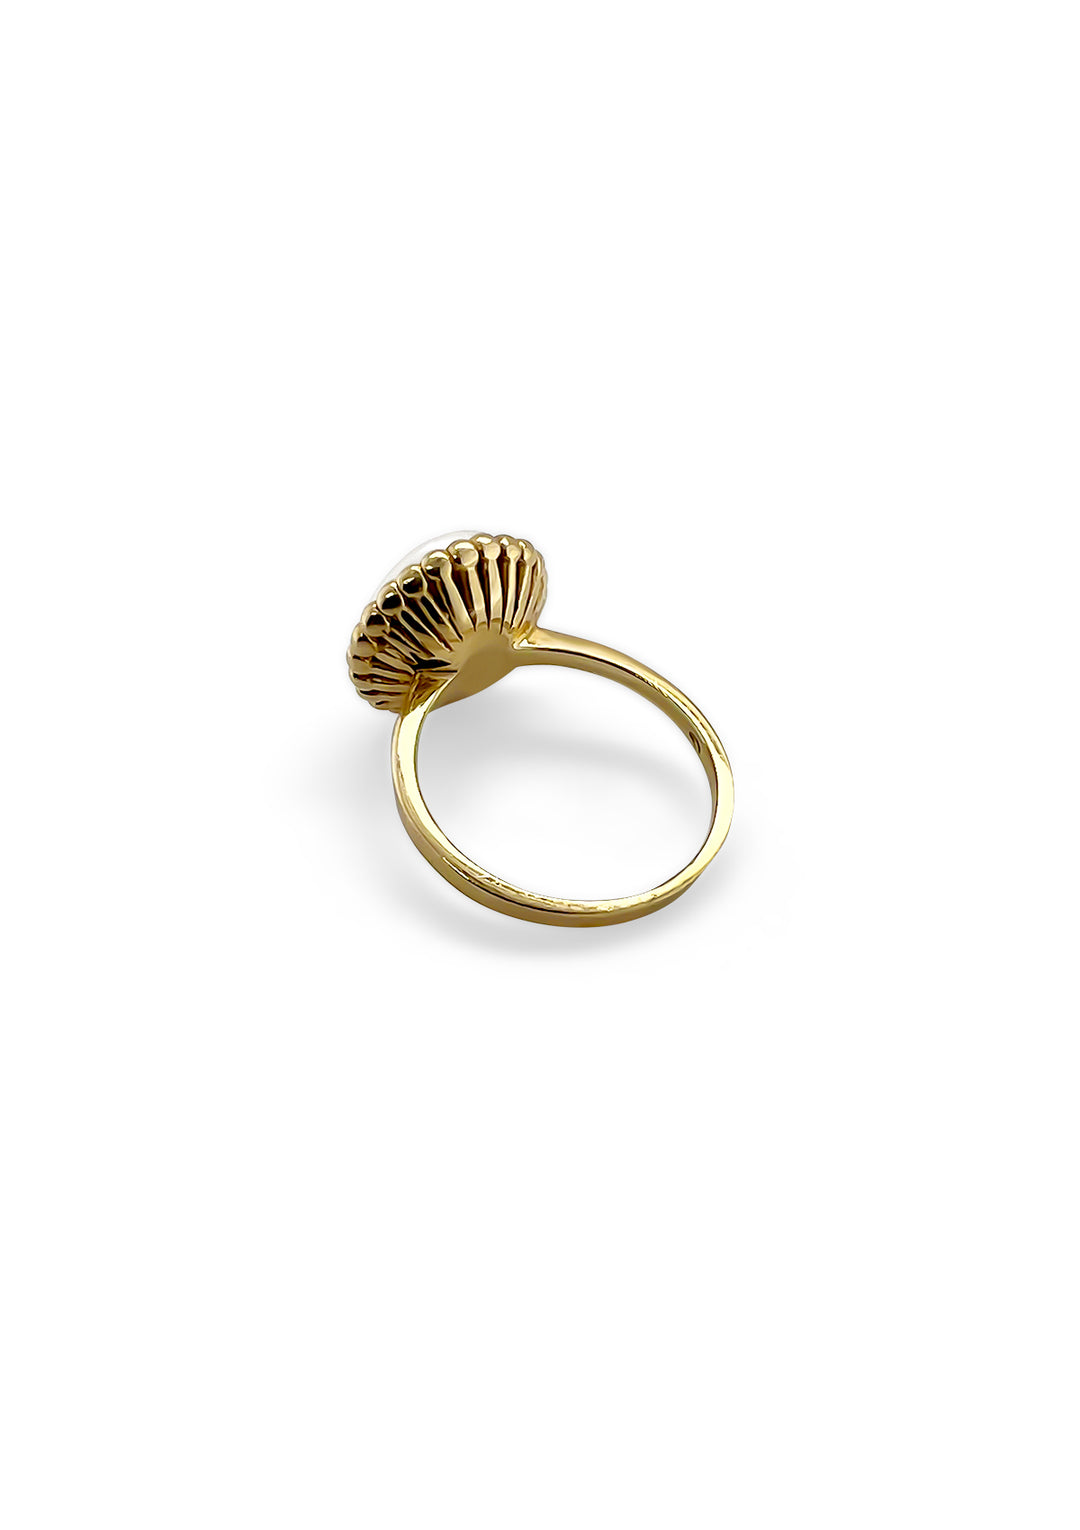 14K Yellow Gold Coin Pearl Ring